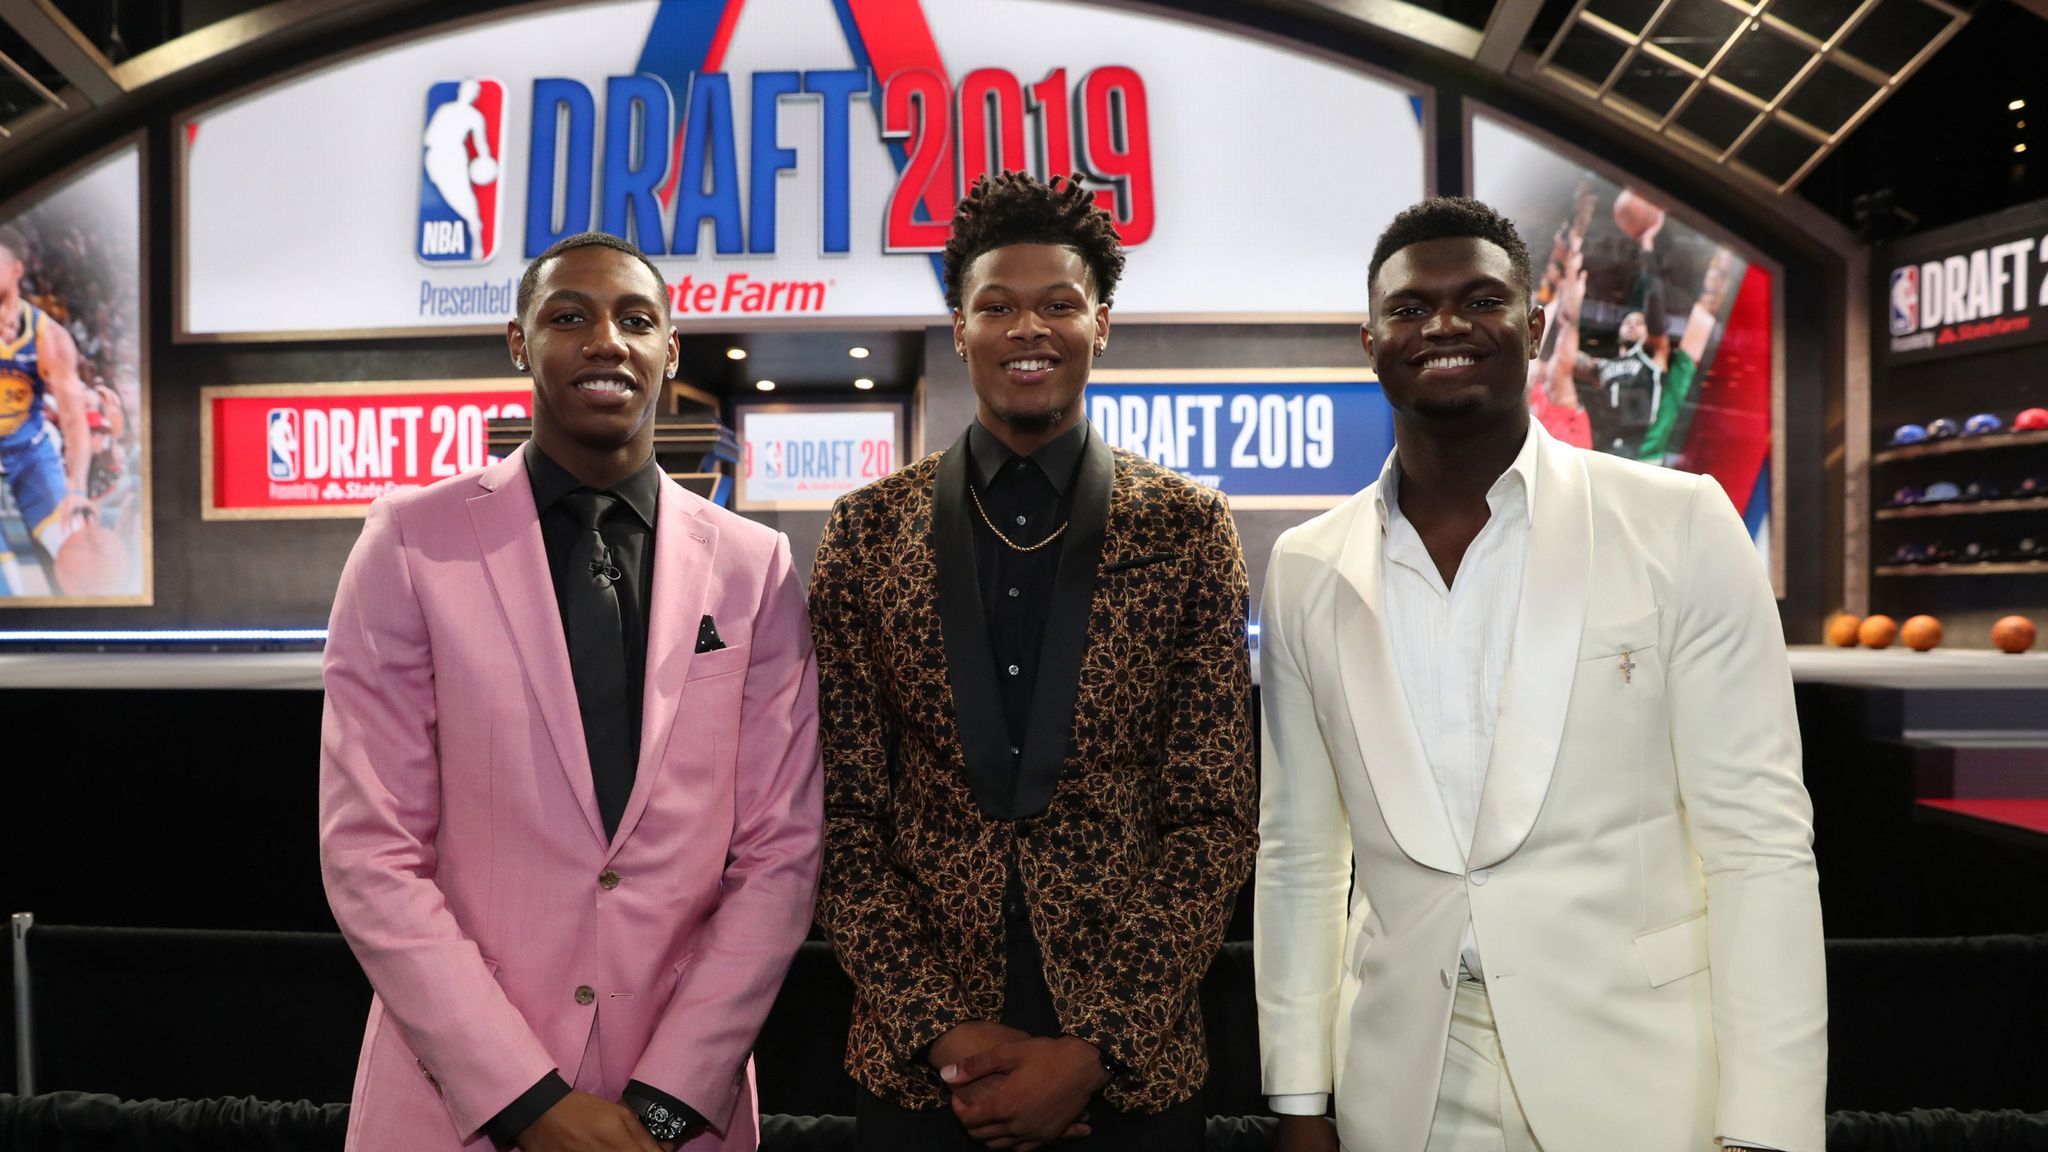 Ja Morant gives LeBron and Steph a C on their draft fits!: The